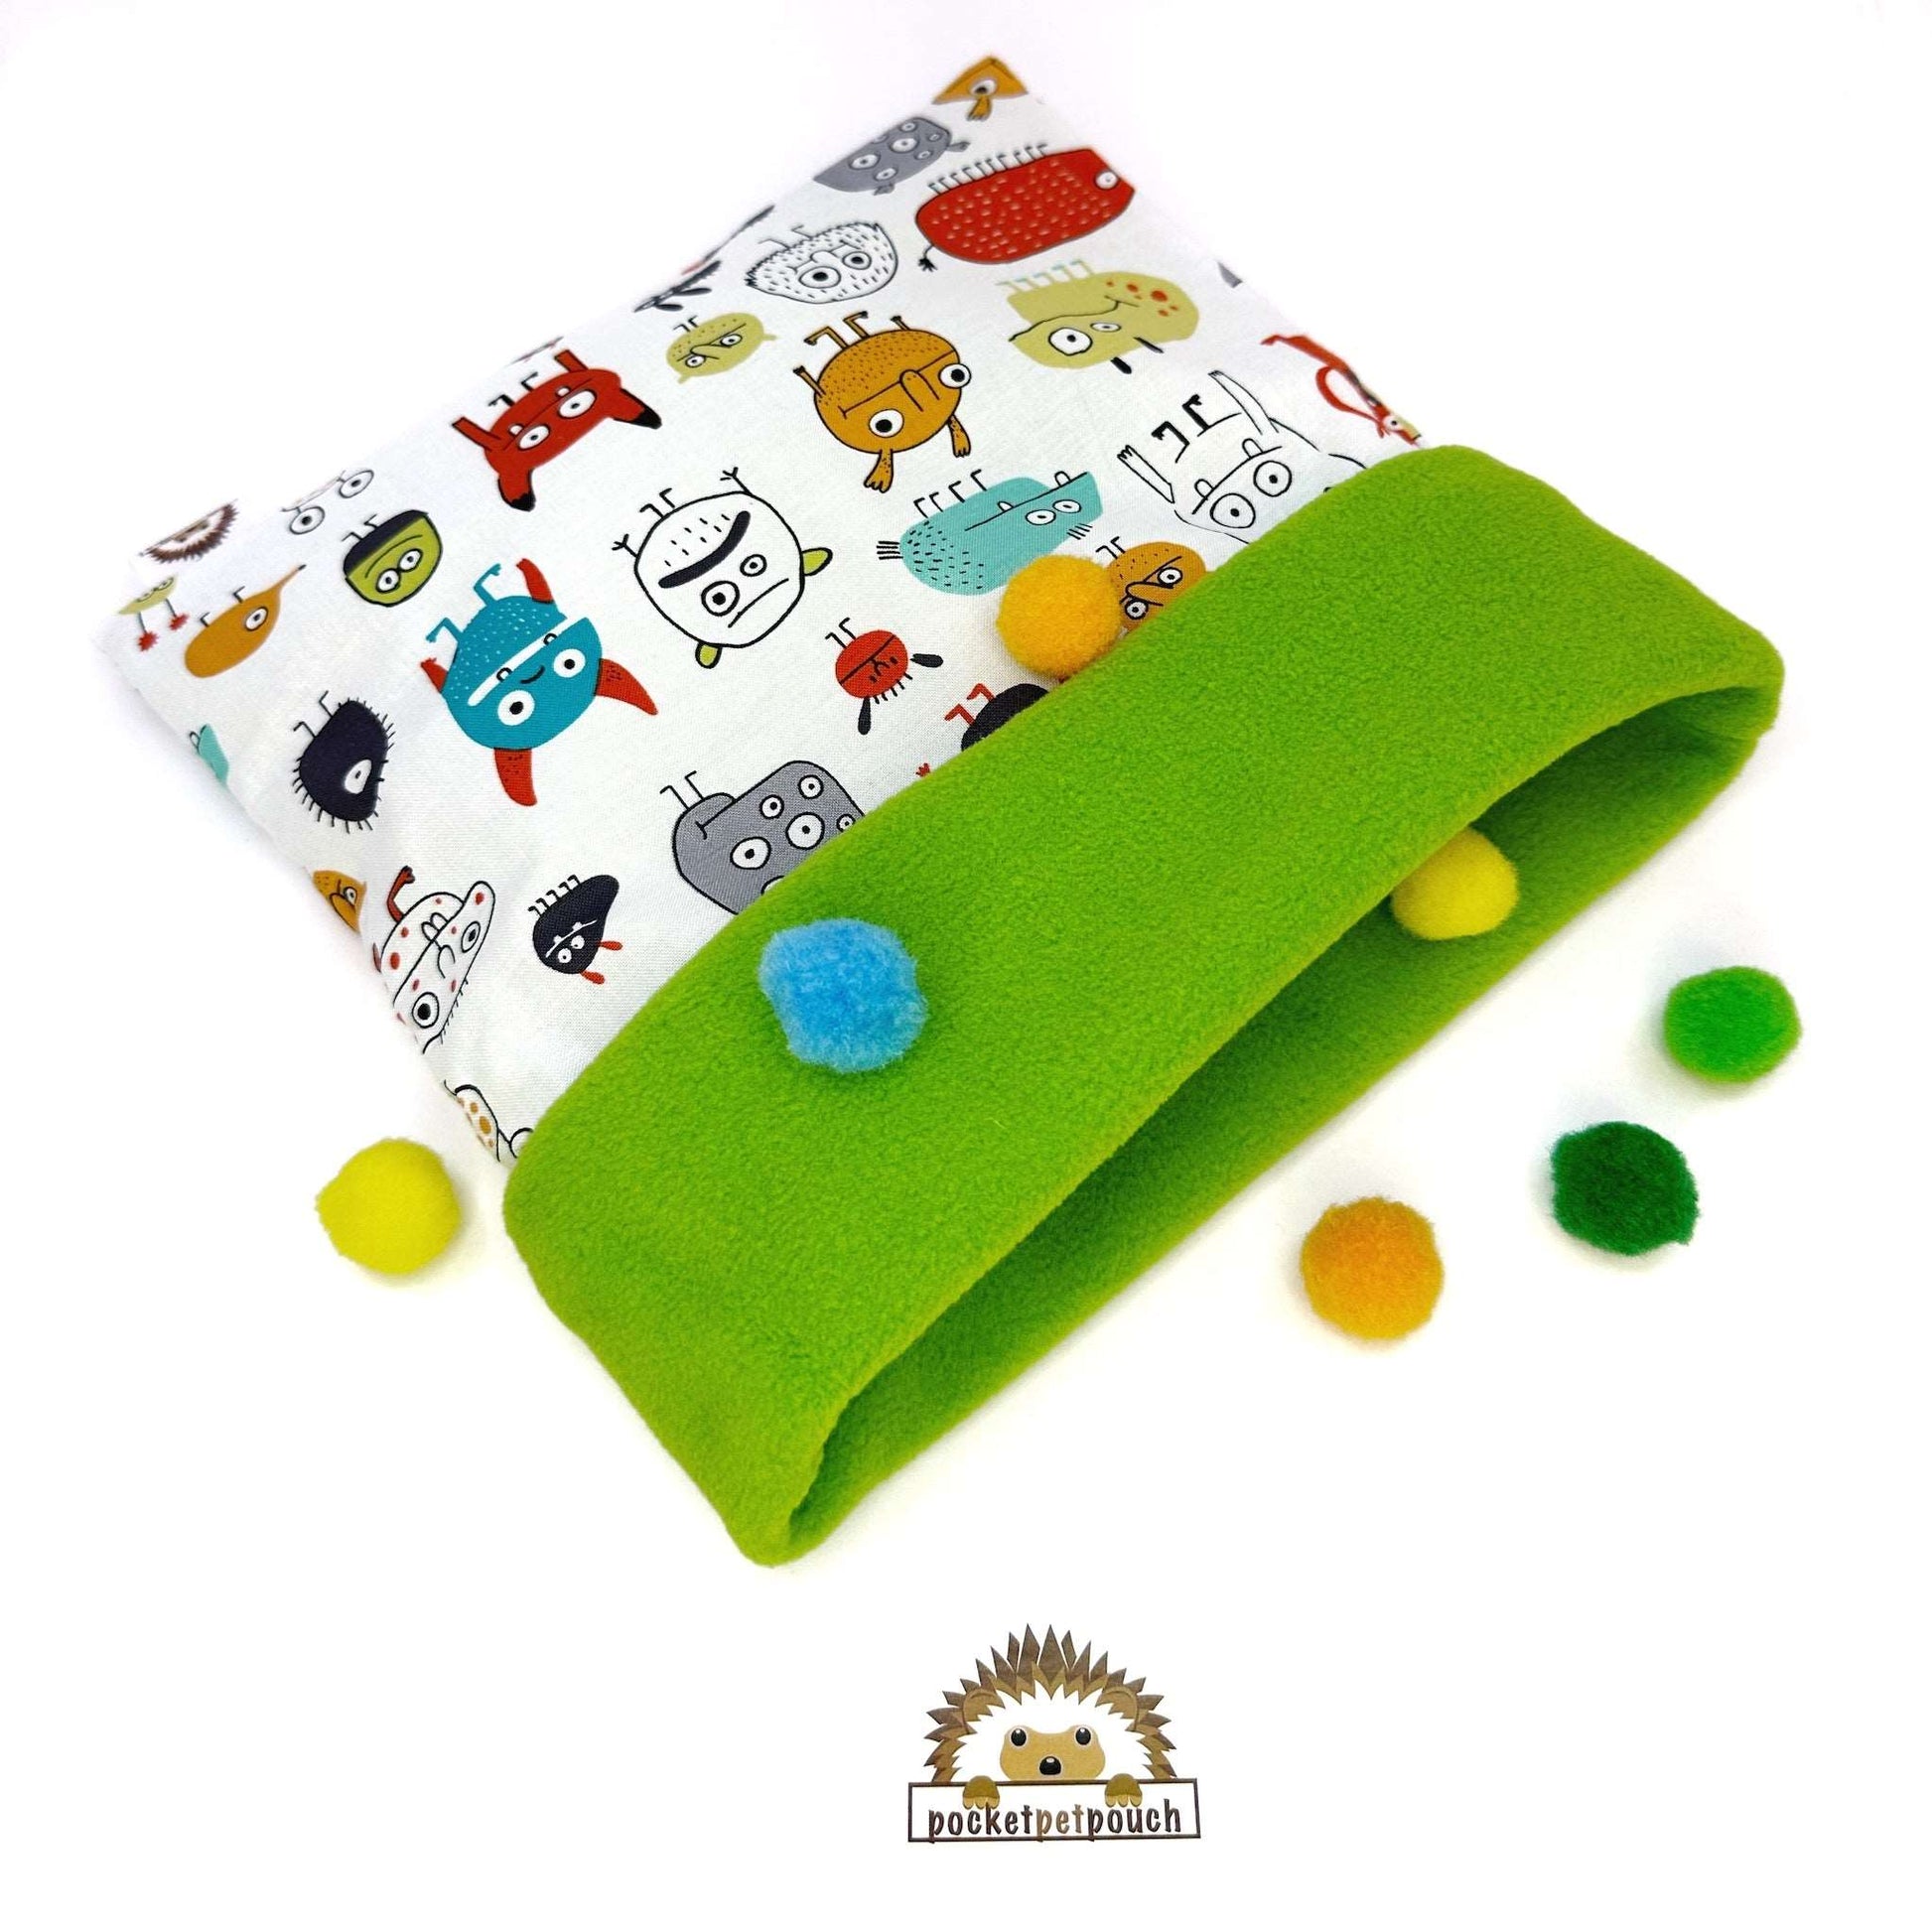 PocketPetPouch Snuggle Sack for hedgehogs and small animals. Cotton Shell with Anti-Pill fleece lining. Cartoon small pet snuggle sack bonding hedgehog pouch pocket pet Design with neon green inside.